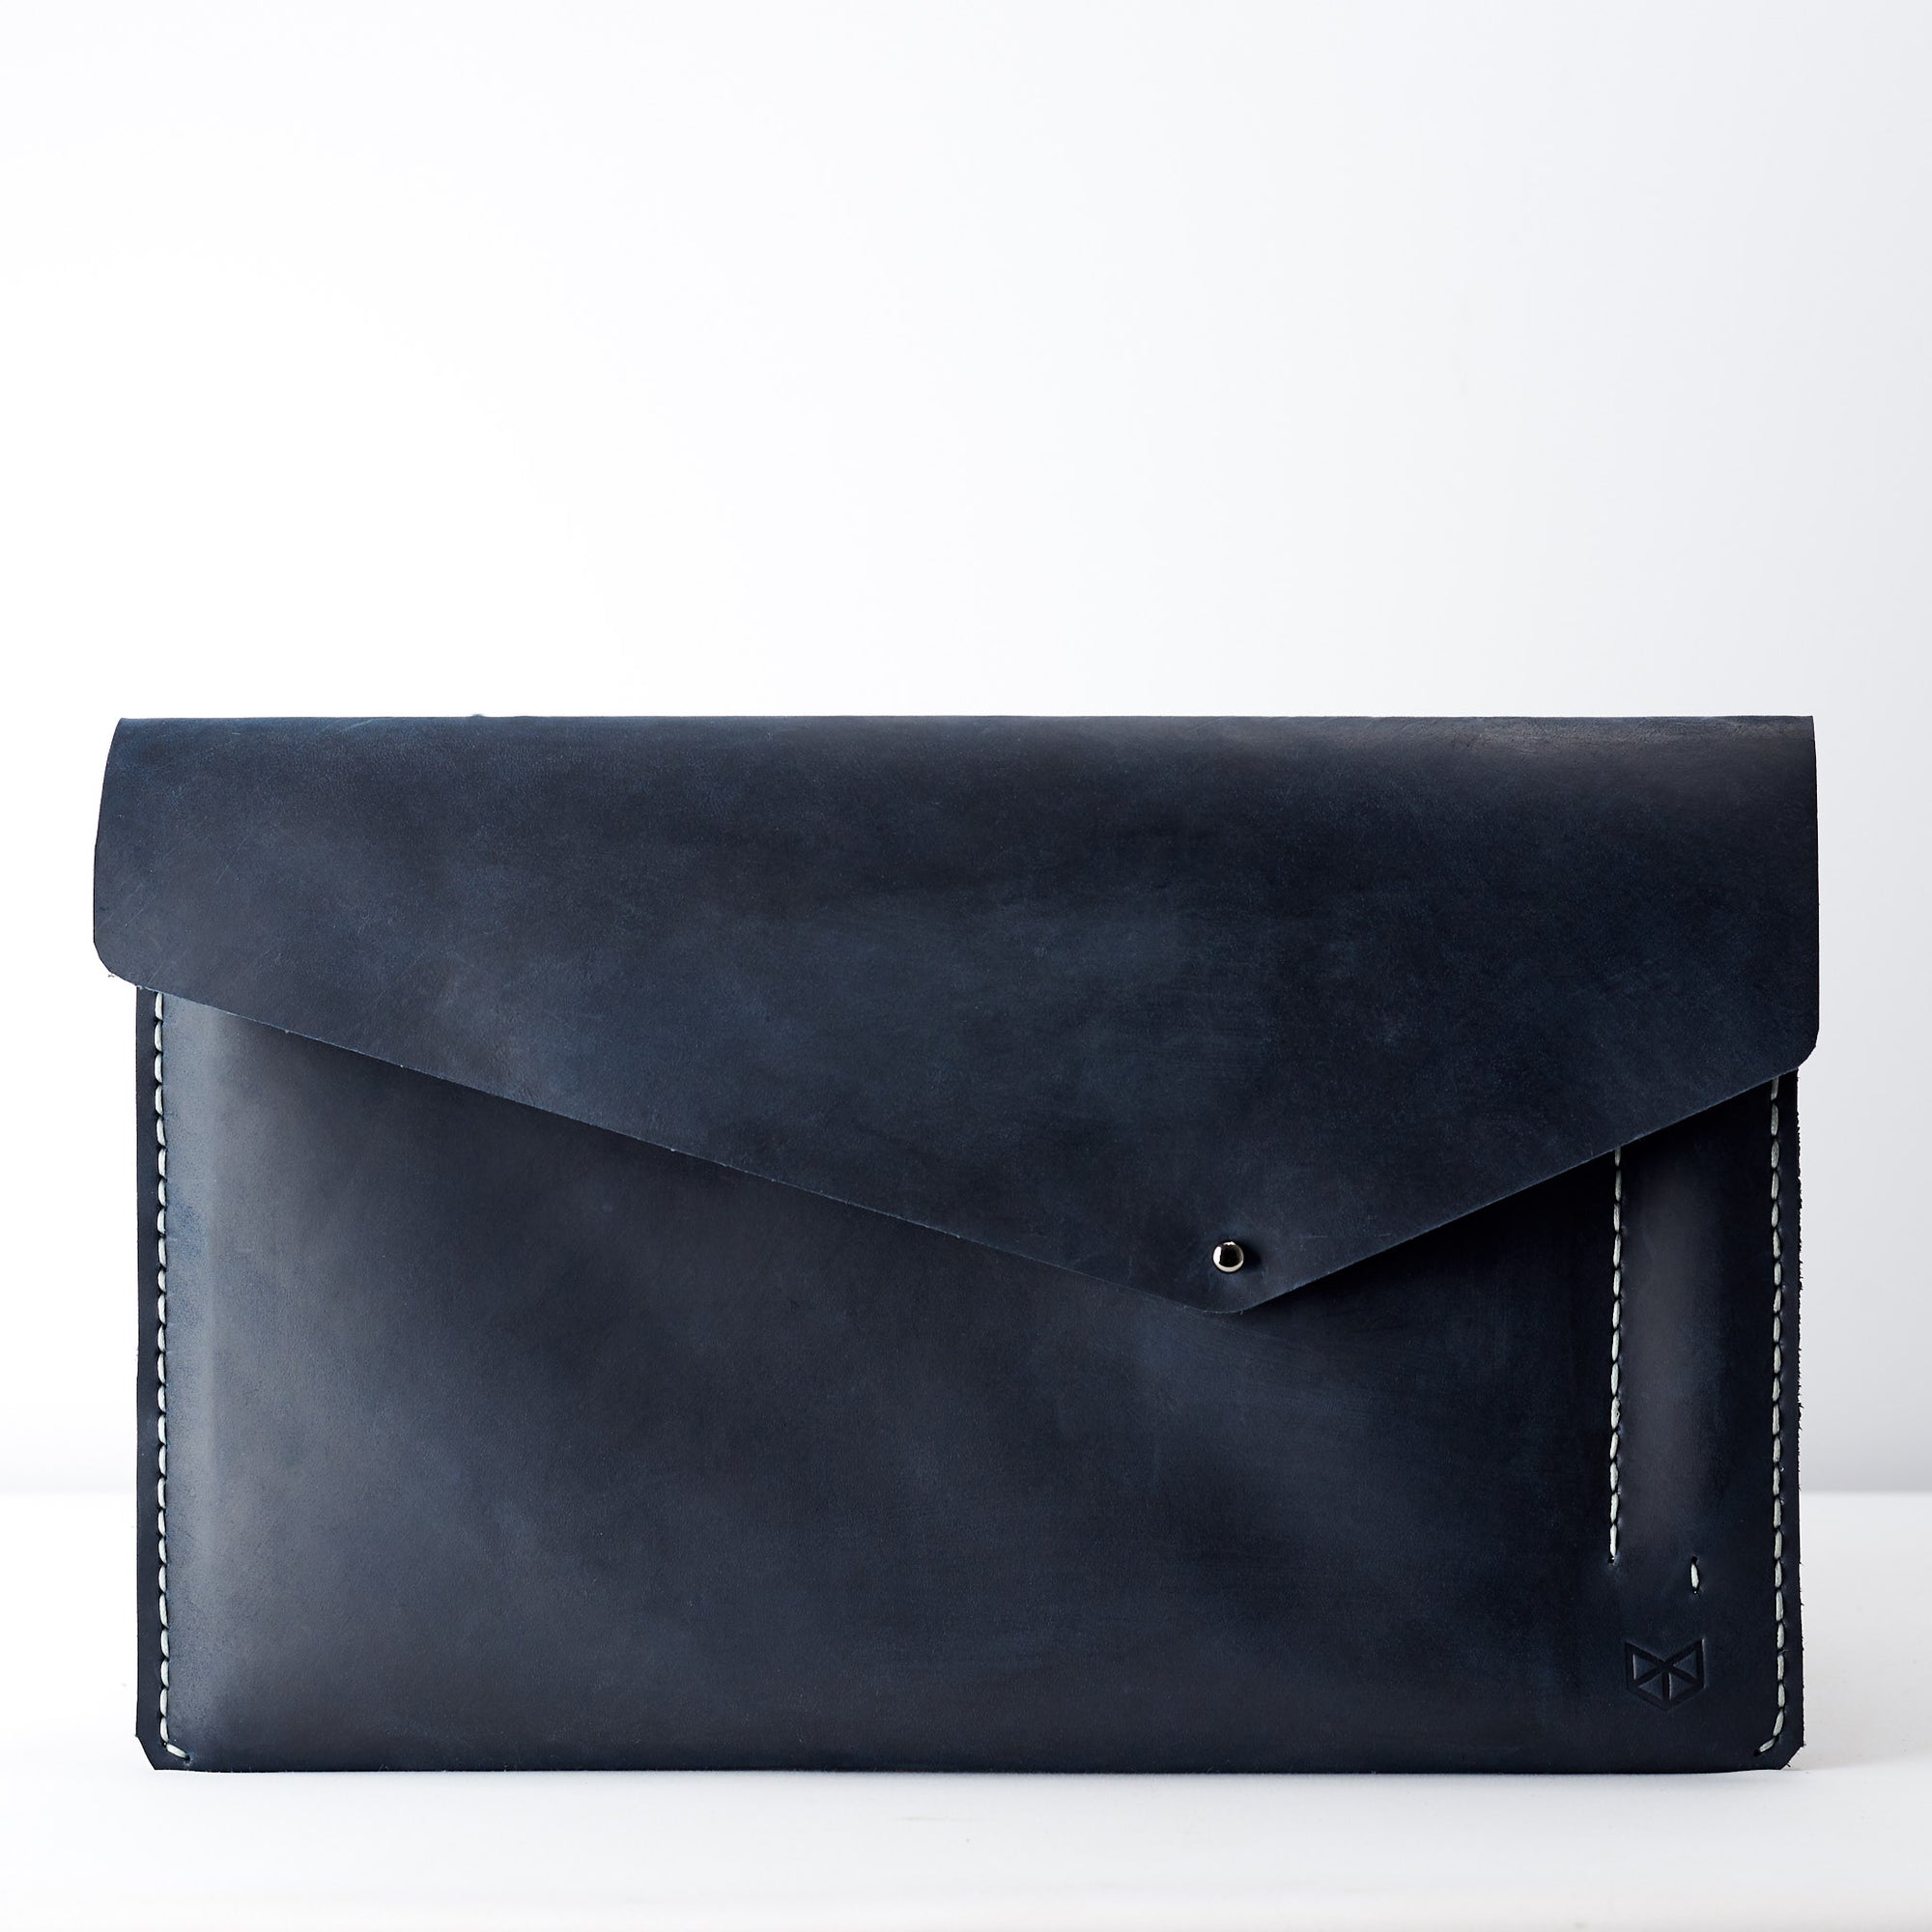 Close Case. iPad Sleeve. iPad Leather Case Navy With Apple Pencil Holder by Capra Leather